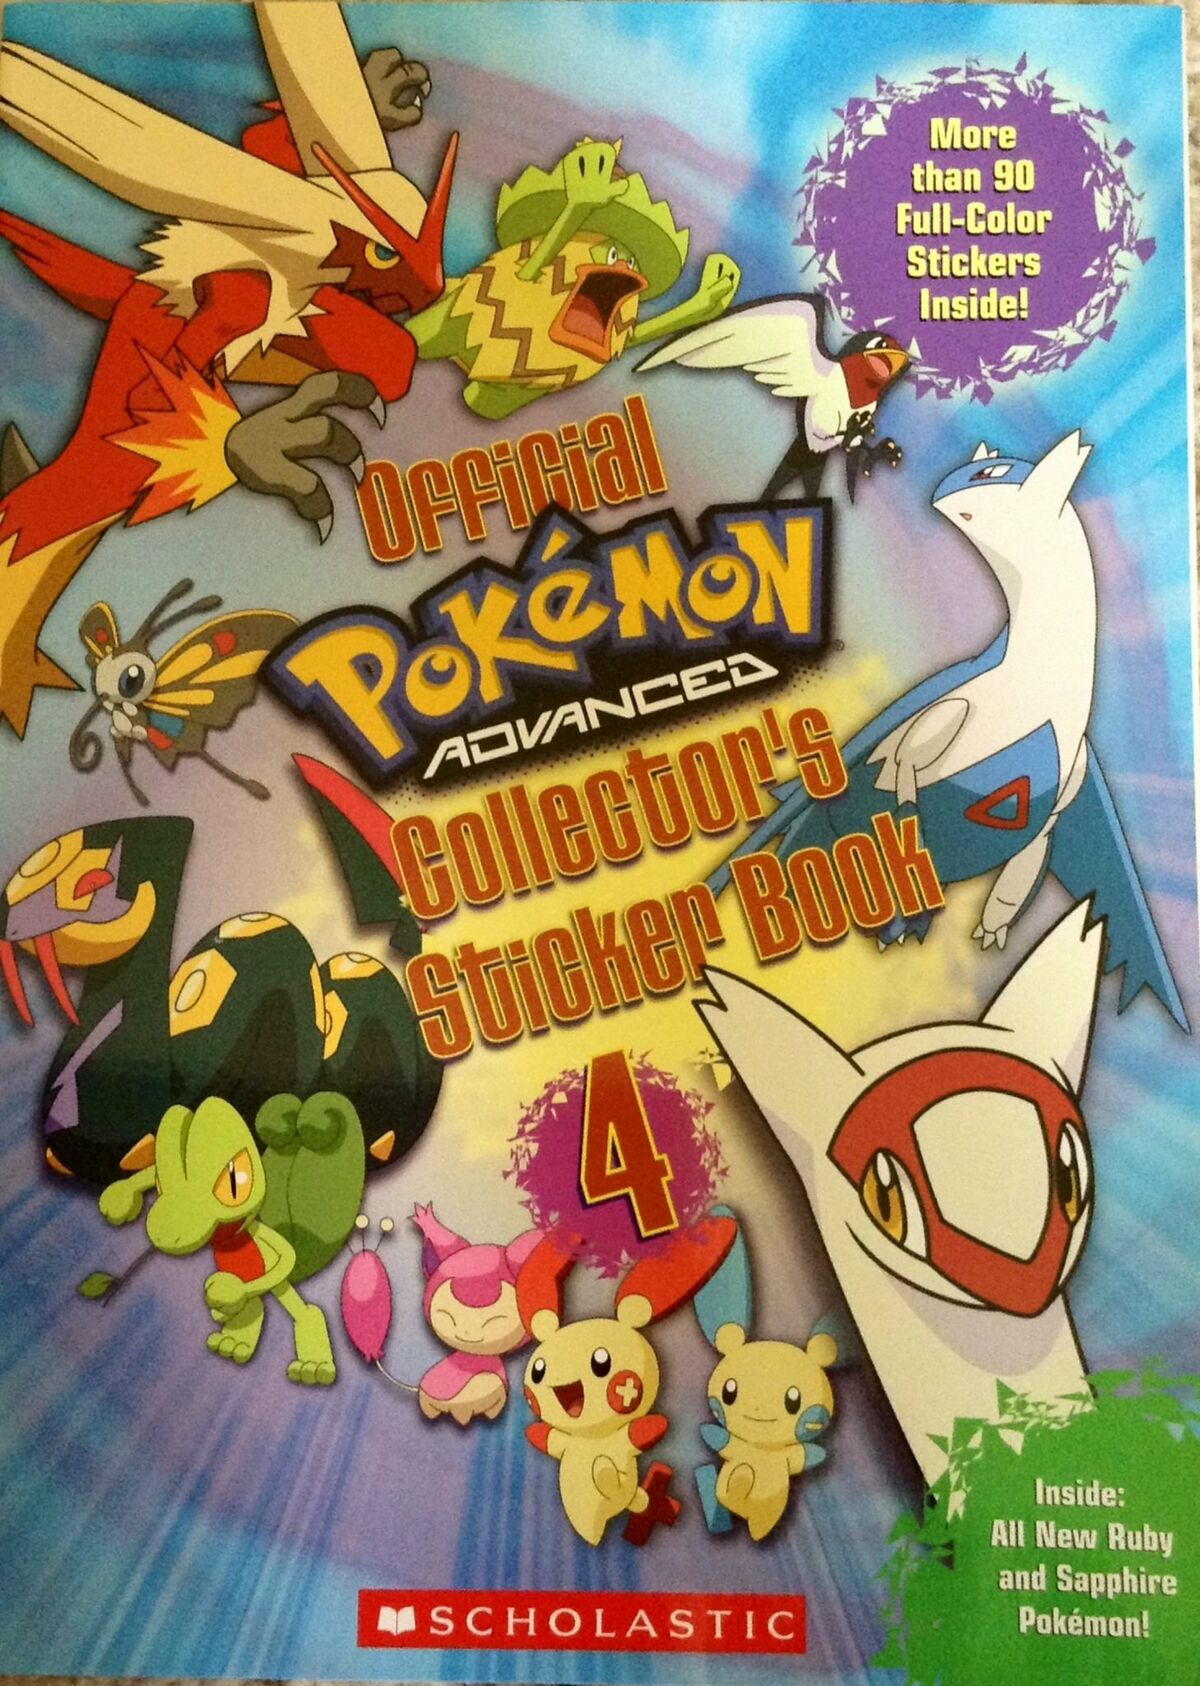 Pokémon: The Official Sticker Book of the Galar Region